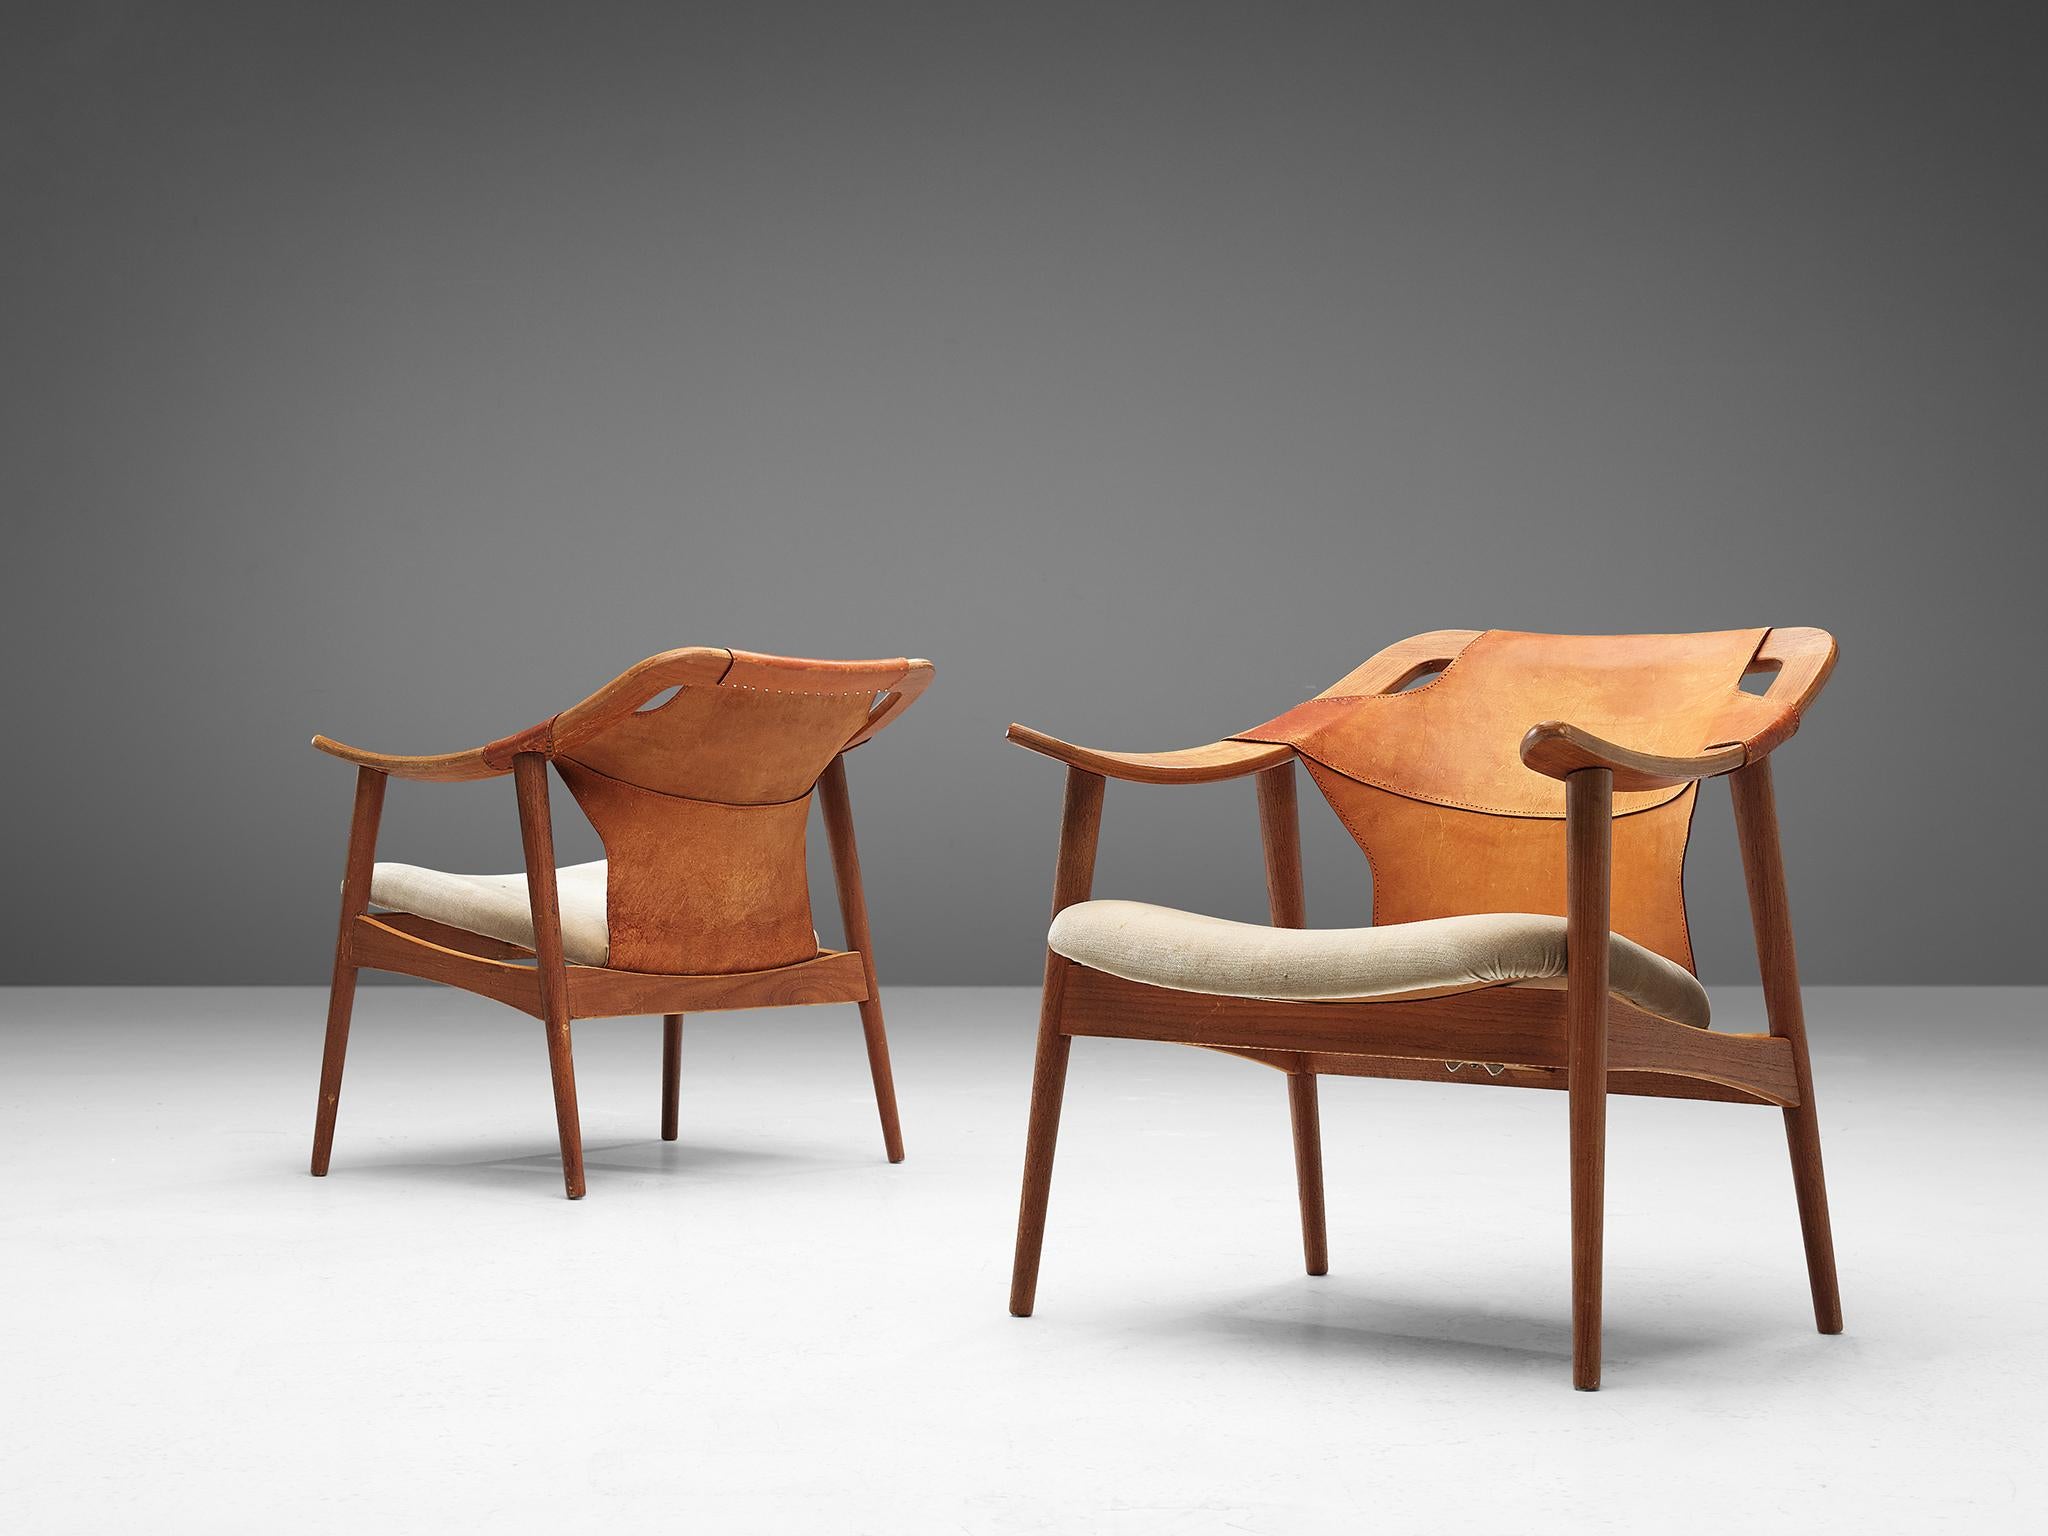 Arne Tidemand Ruud, pair of armchairs model 3050, oak, leather, fabric, Norway, 1960s.

This easy chair is designed by Norwegian designer Arne Tidemand Ruud. This chair is very dynamic due it's design and shapes. The oak frame shows beautiful curves